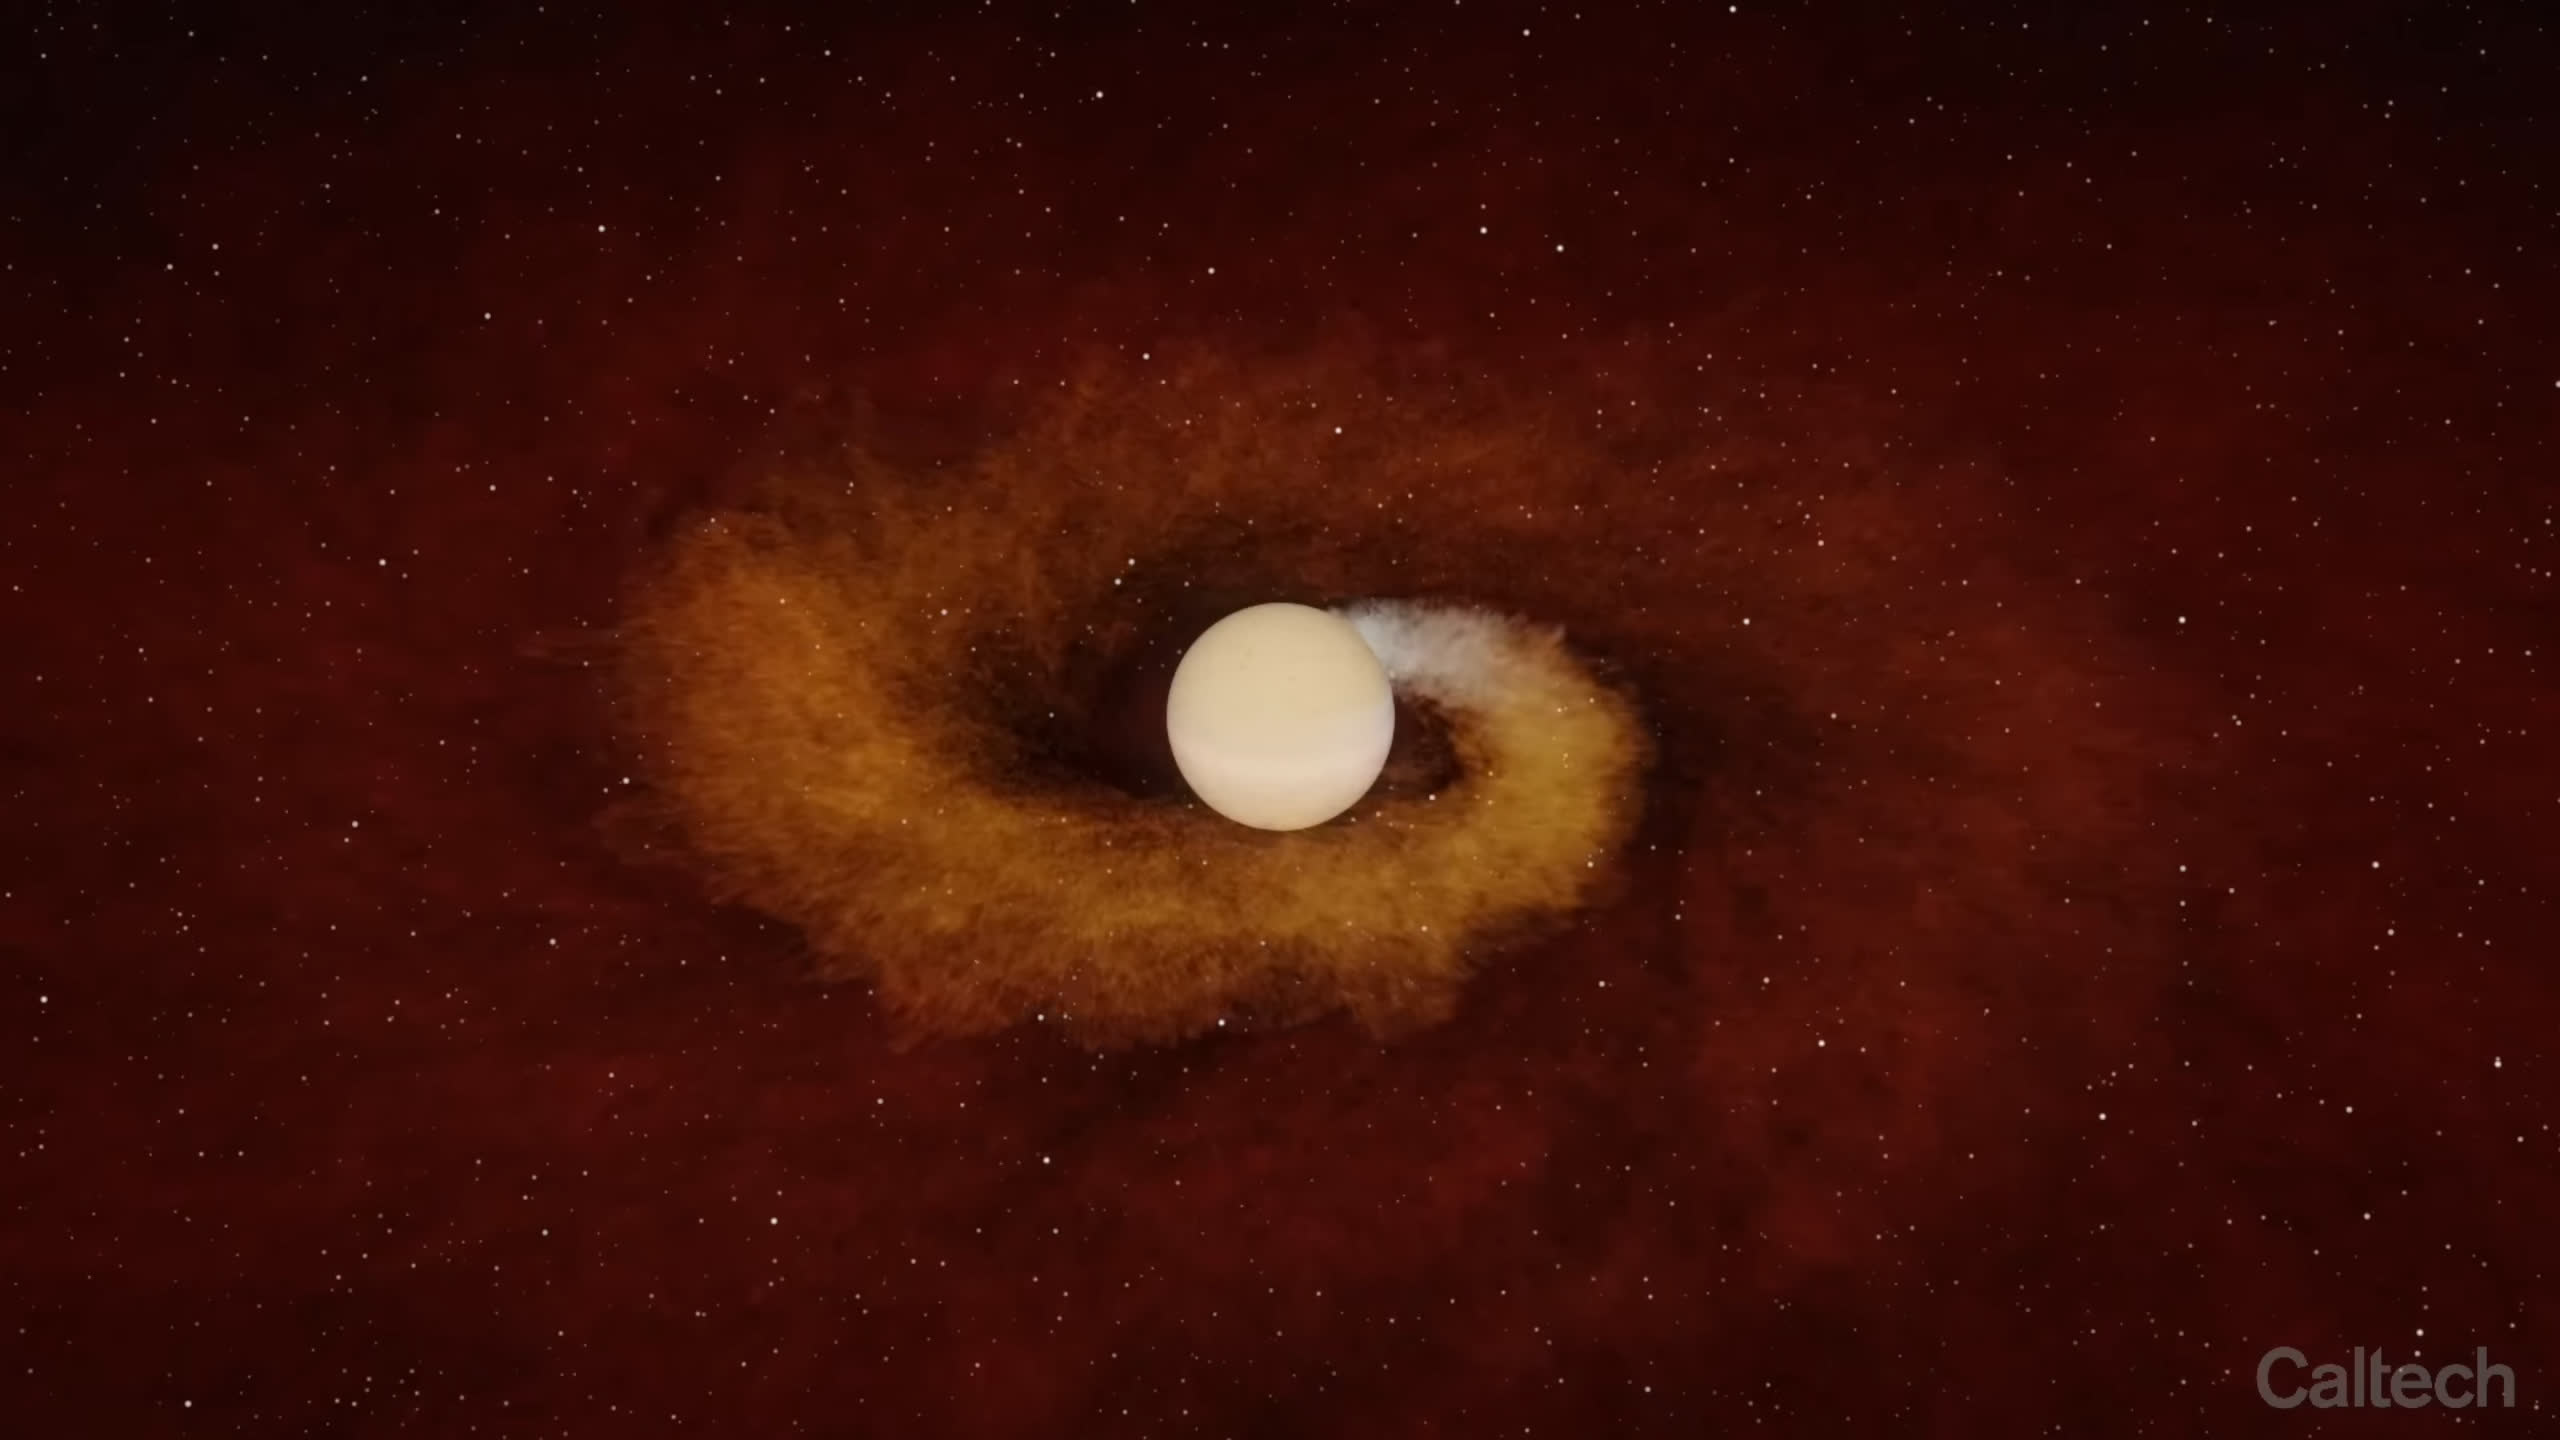 Astronomers witness a star in its final days devouring a giant planet